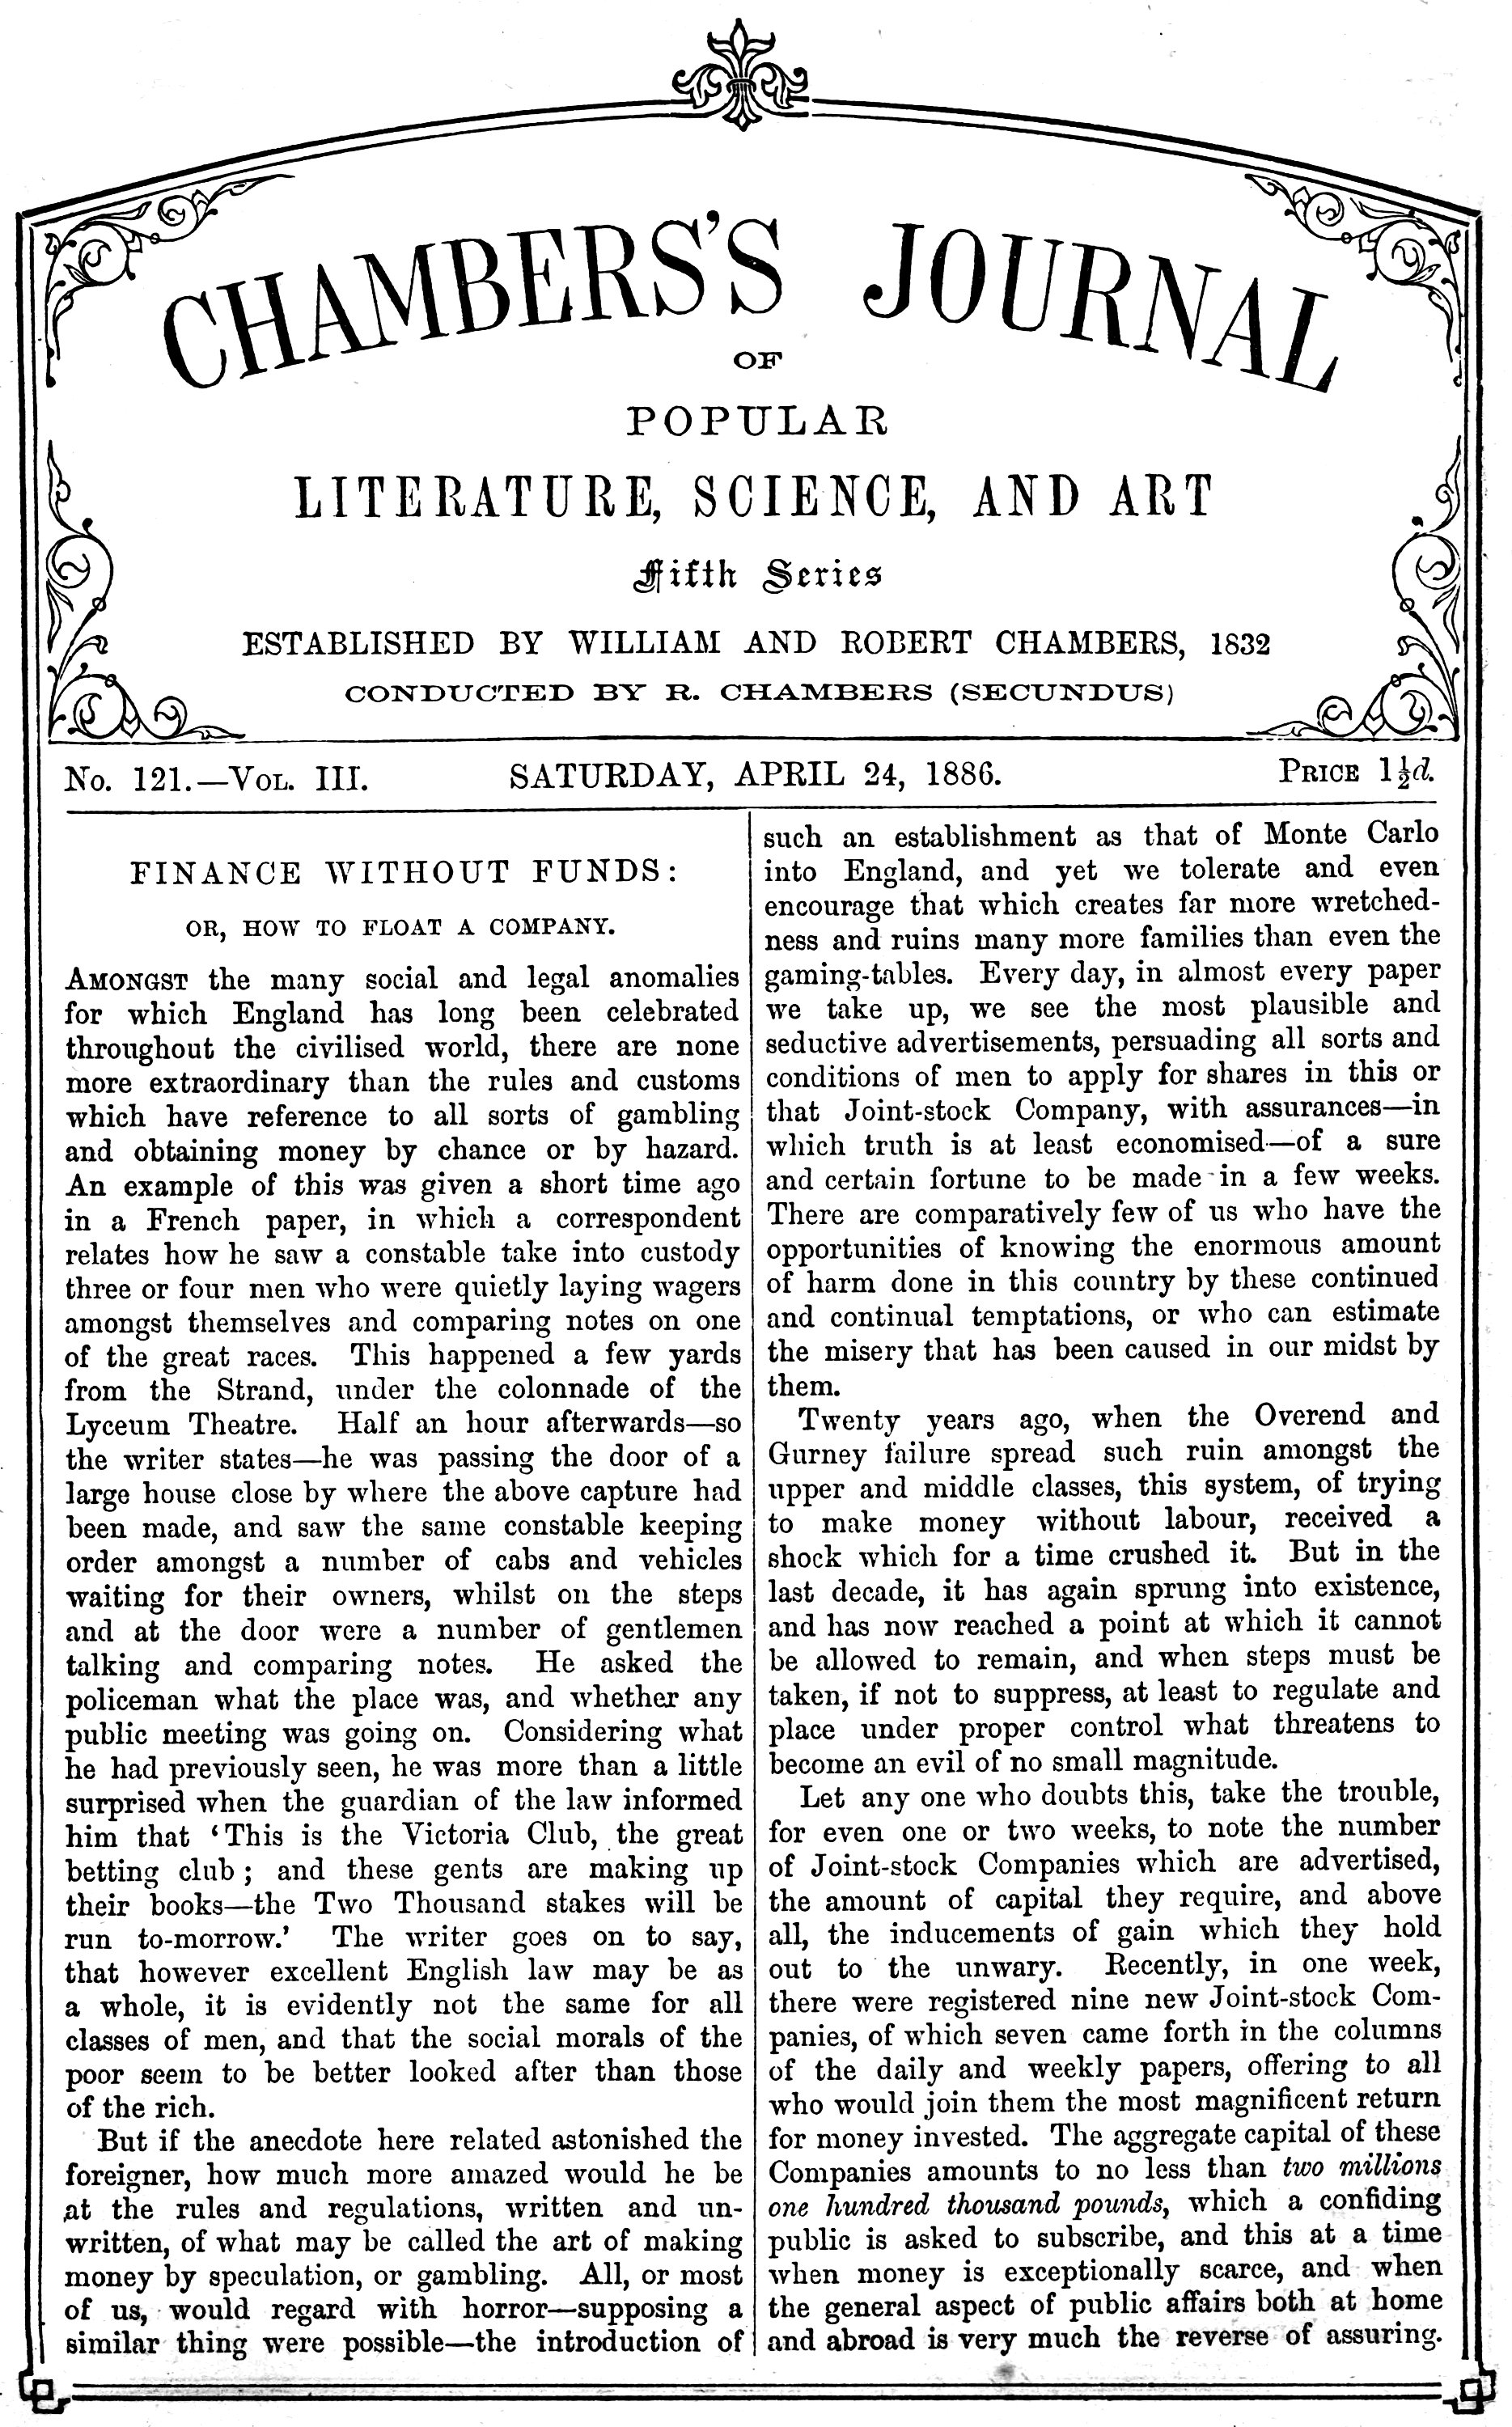 Chambers's Journal of Popular Literature, Science, and Art, fifth series, no. 121, vol. III, April 24, 1886